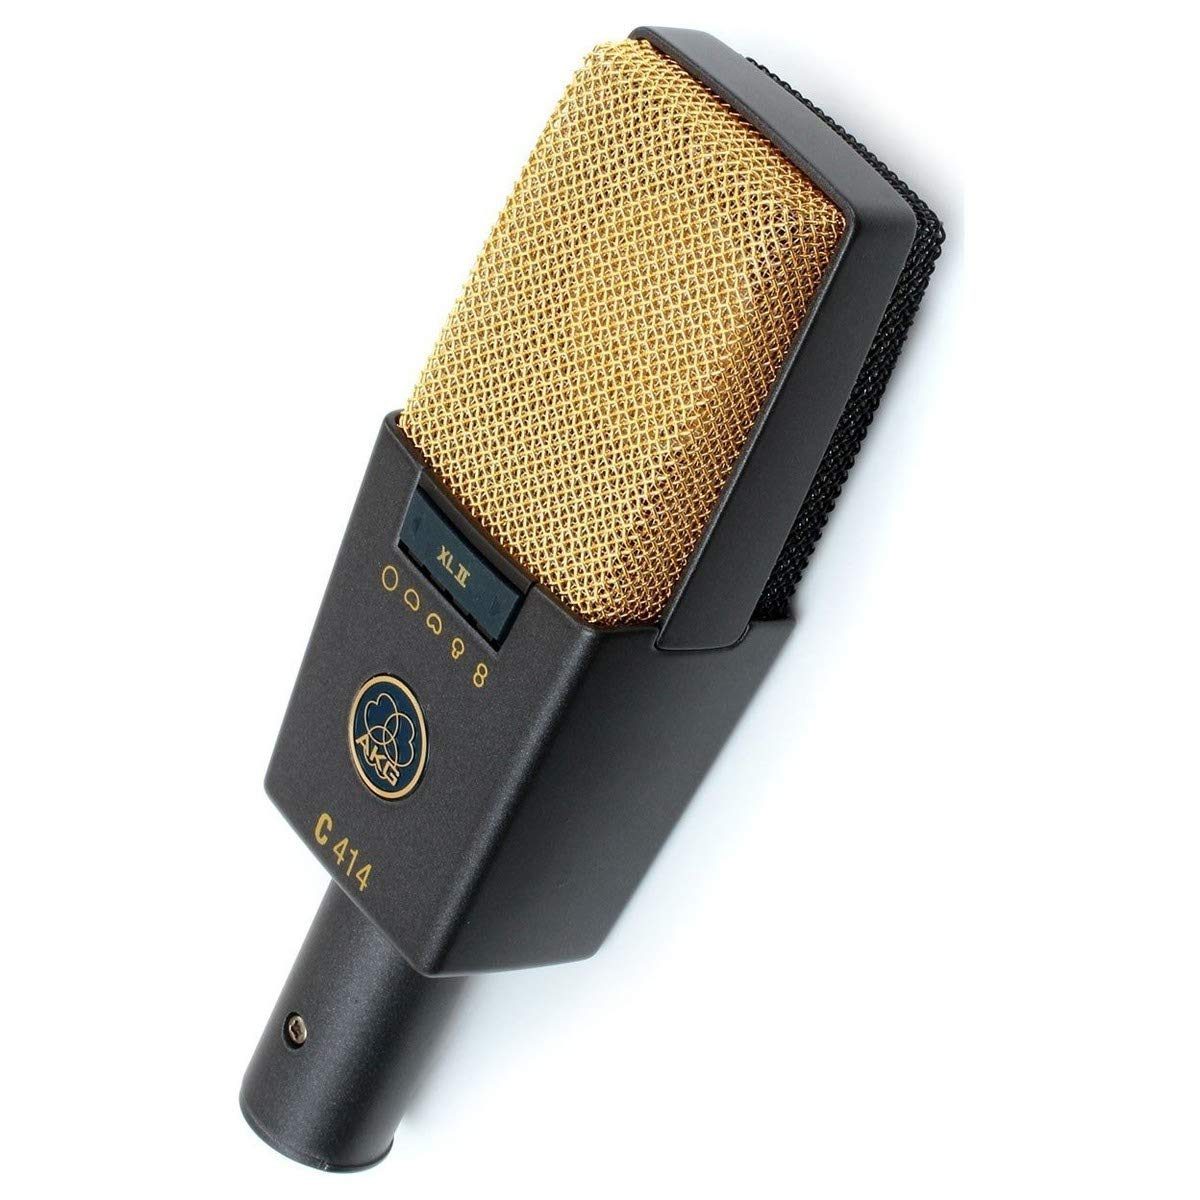 Review: AKG C414 XLII Condenser Microphone